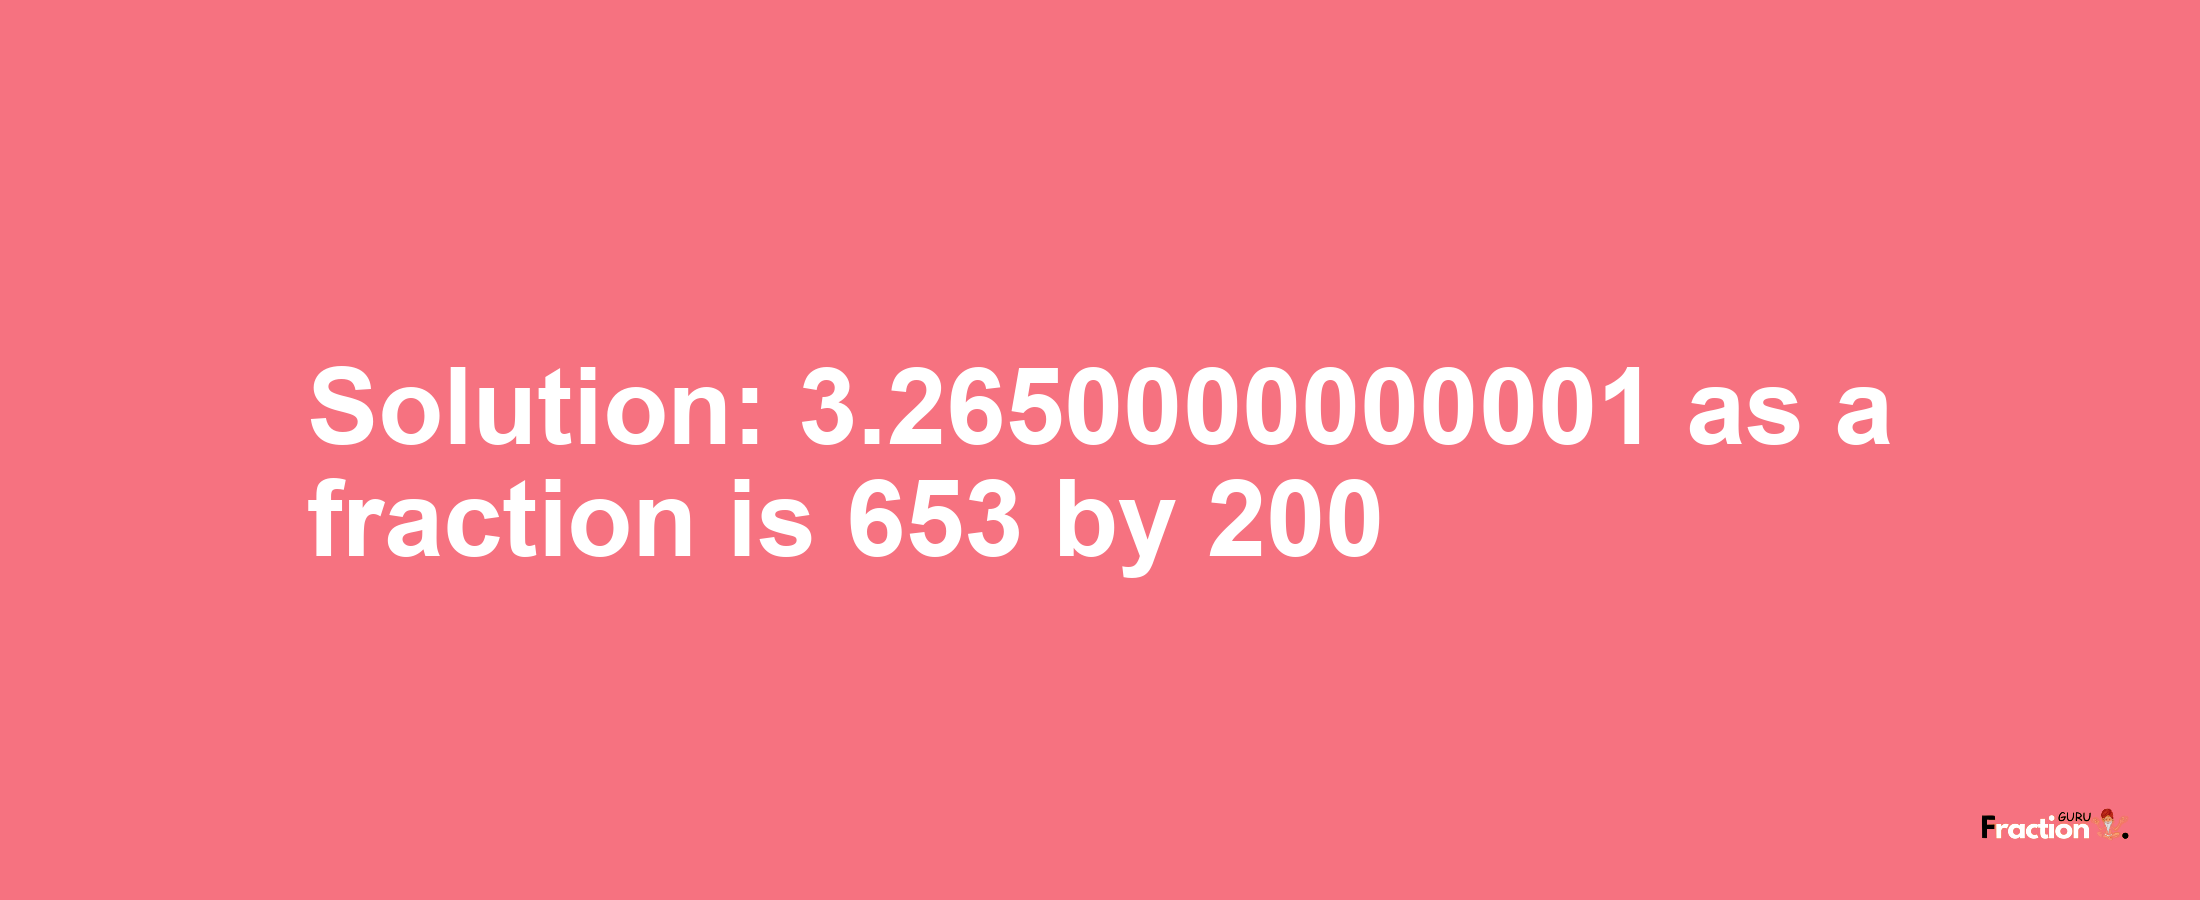 Solution:3.2650000000001 as a fraction is 653/200